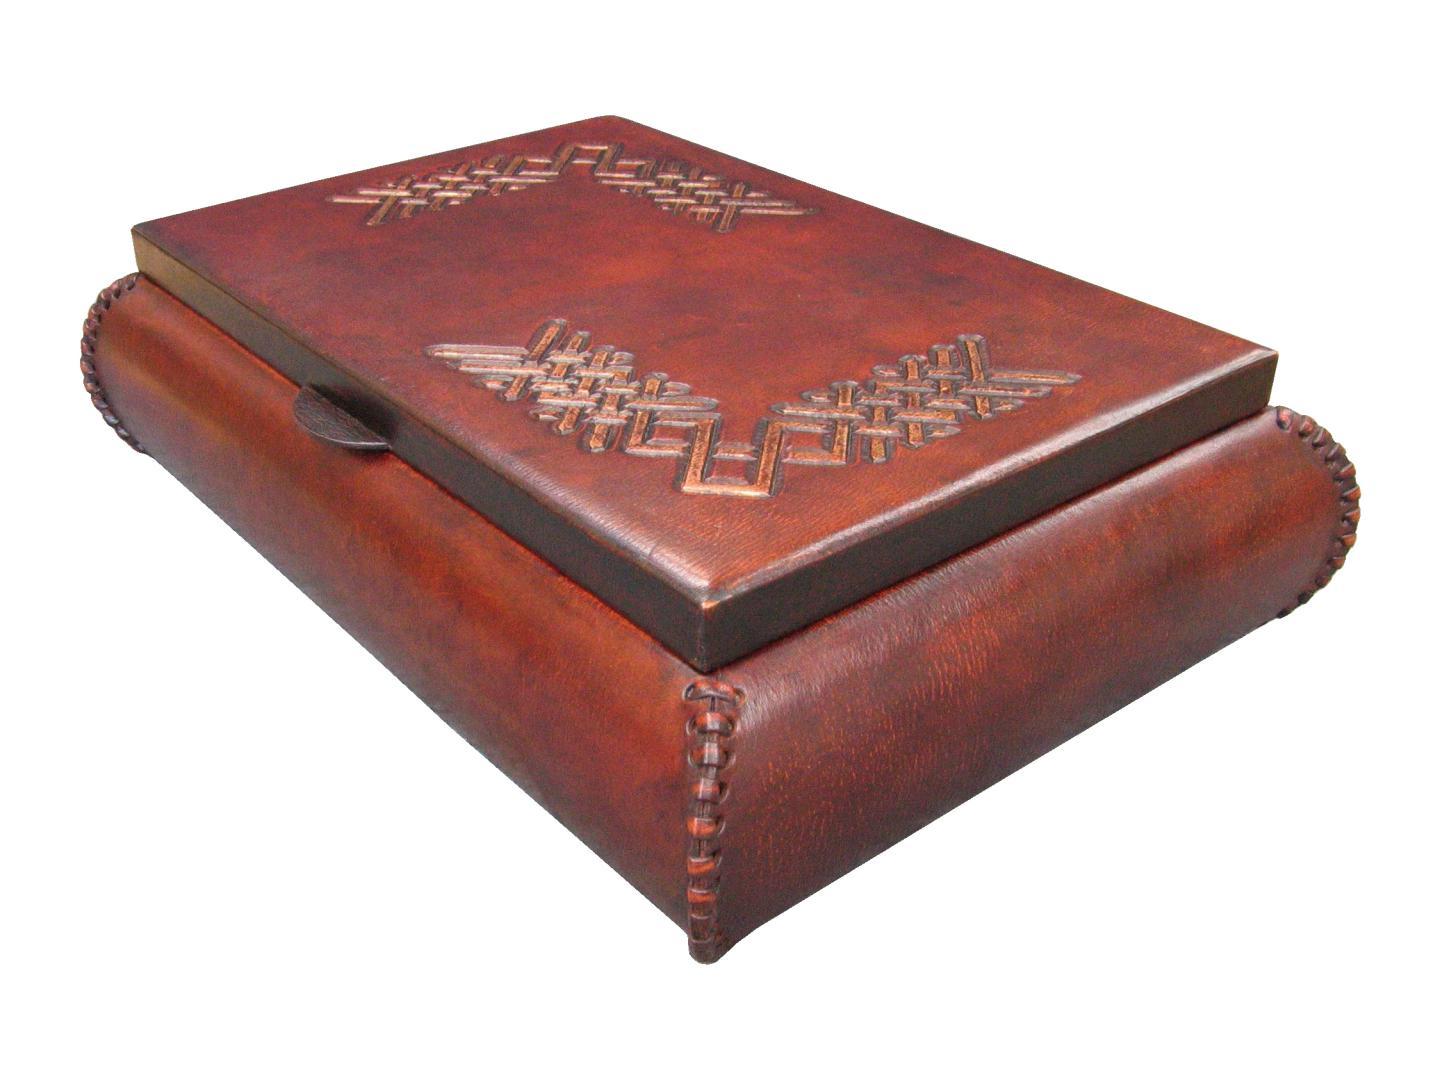 leather box with tooling/carved gold design on the top and hand stitches on side of the piece